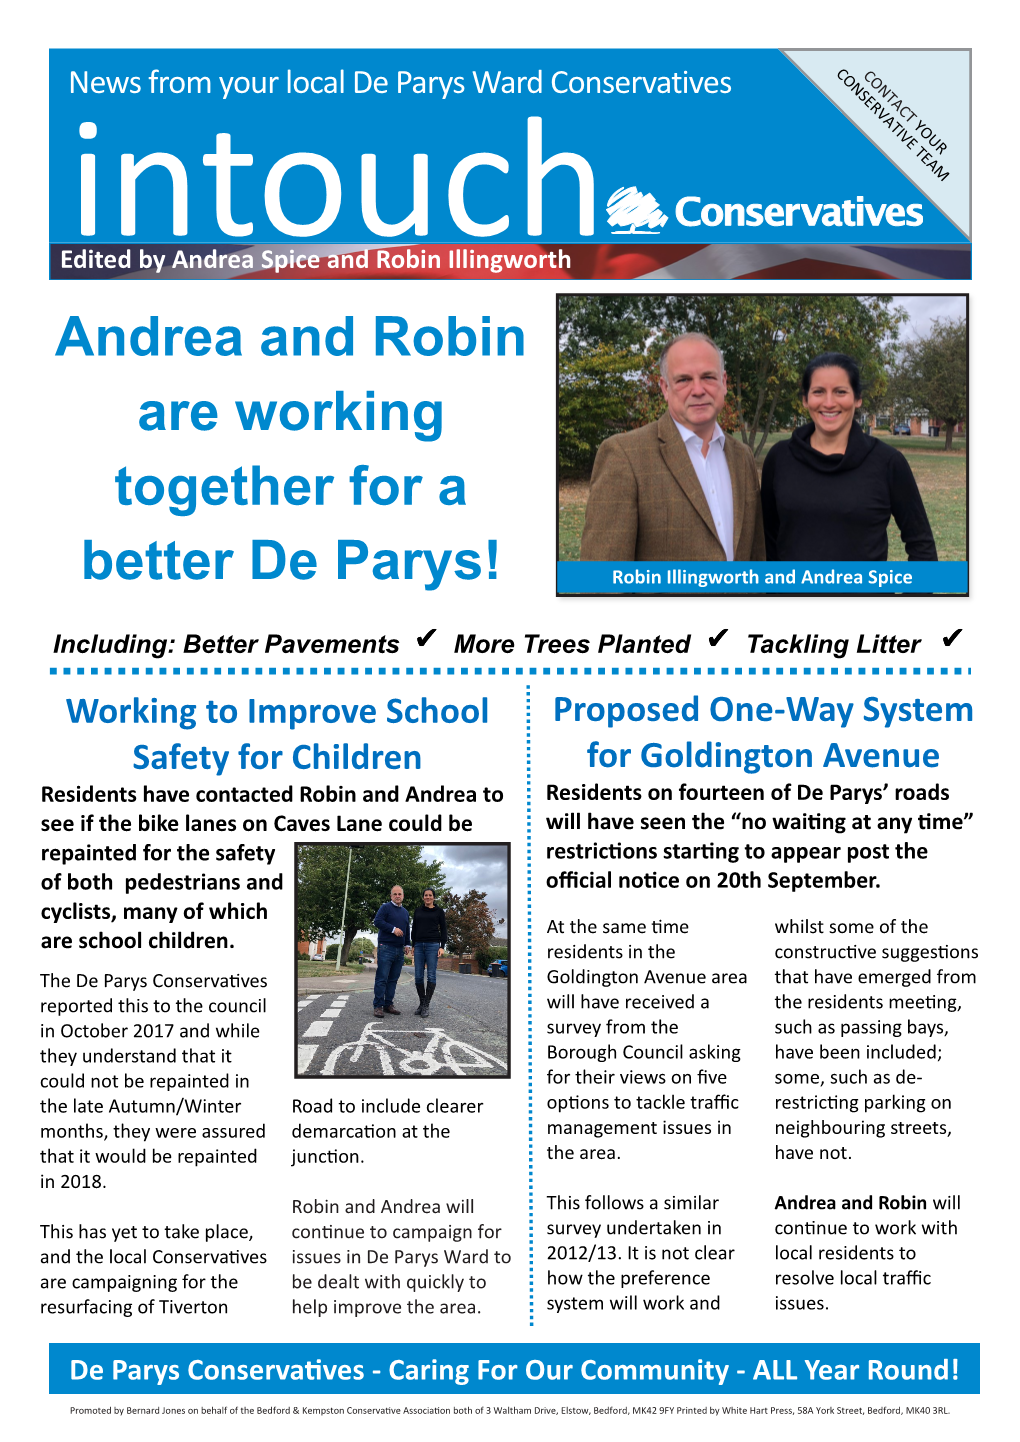 Andrea and Robin Are Working Together for a Better De Parys!